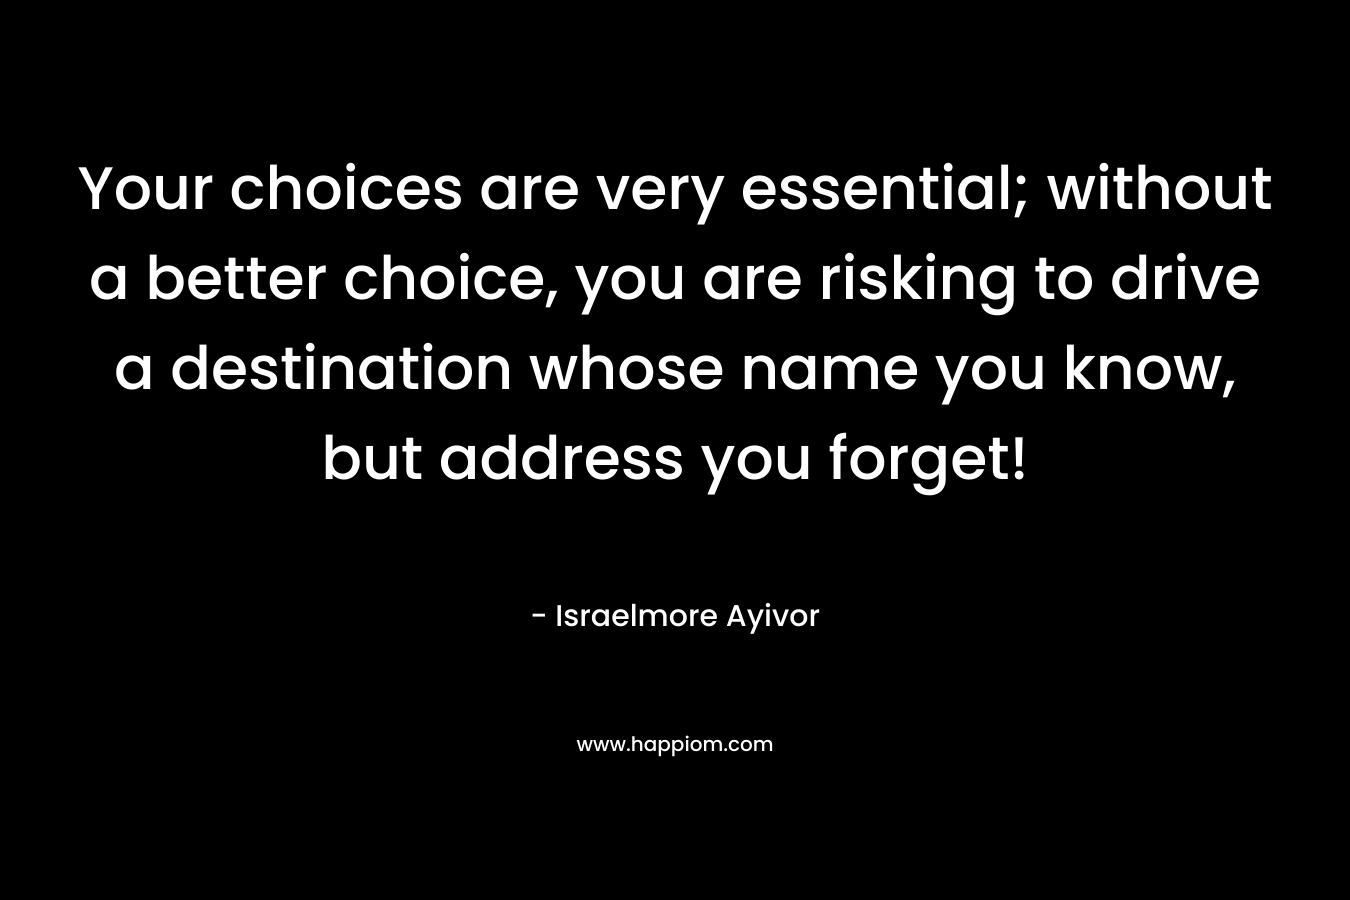 Your choices are very essential; without a better choice, you are risking to drive a destination whose name you know, but address you forget! – Israelmore Ayivor